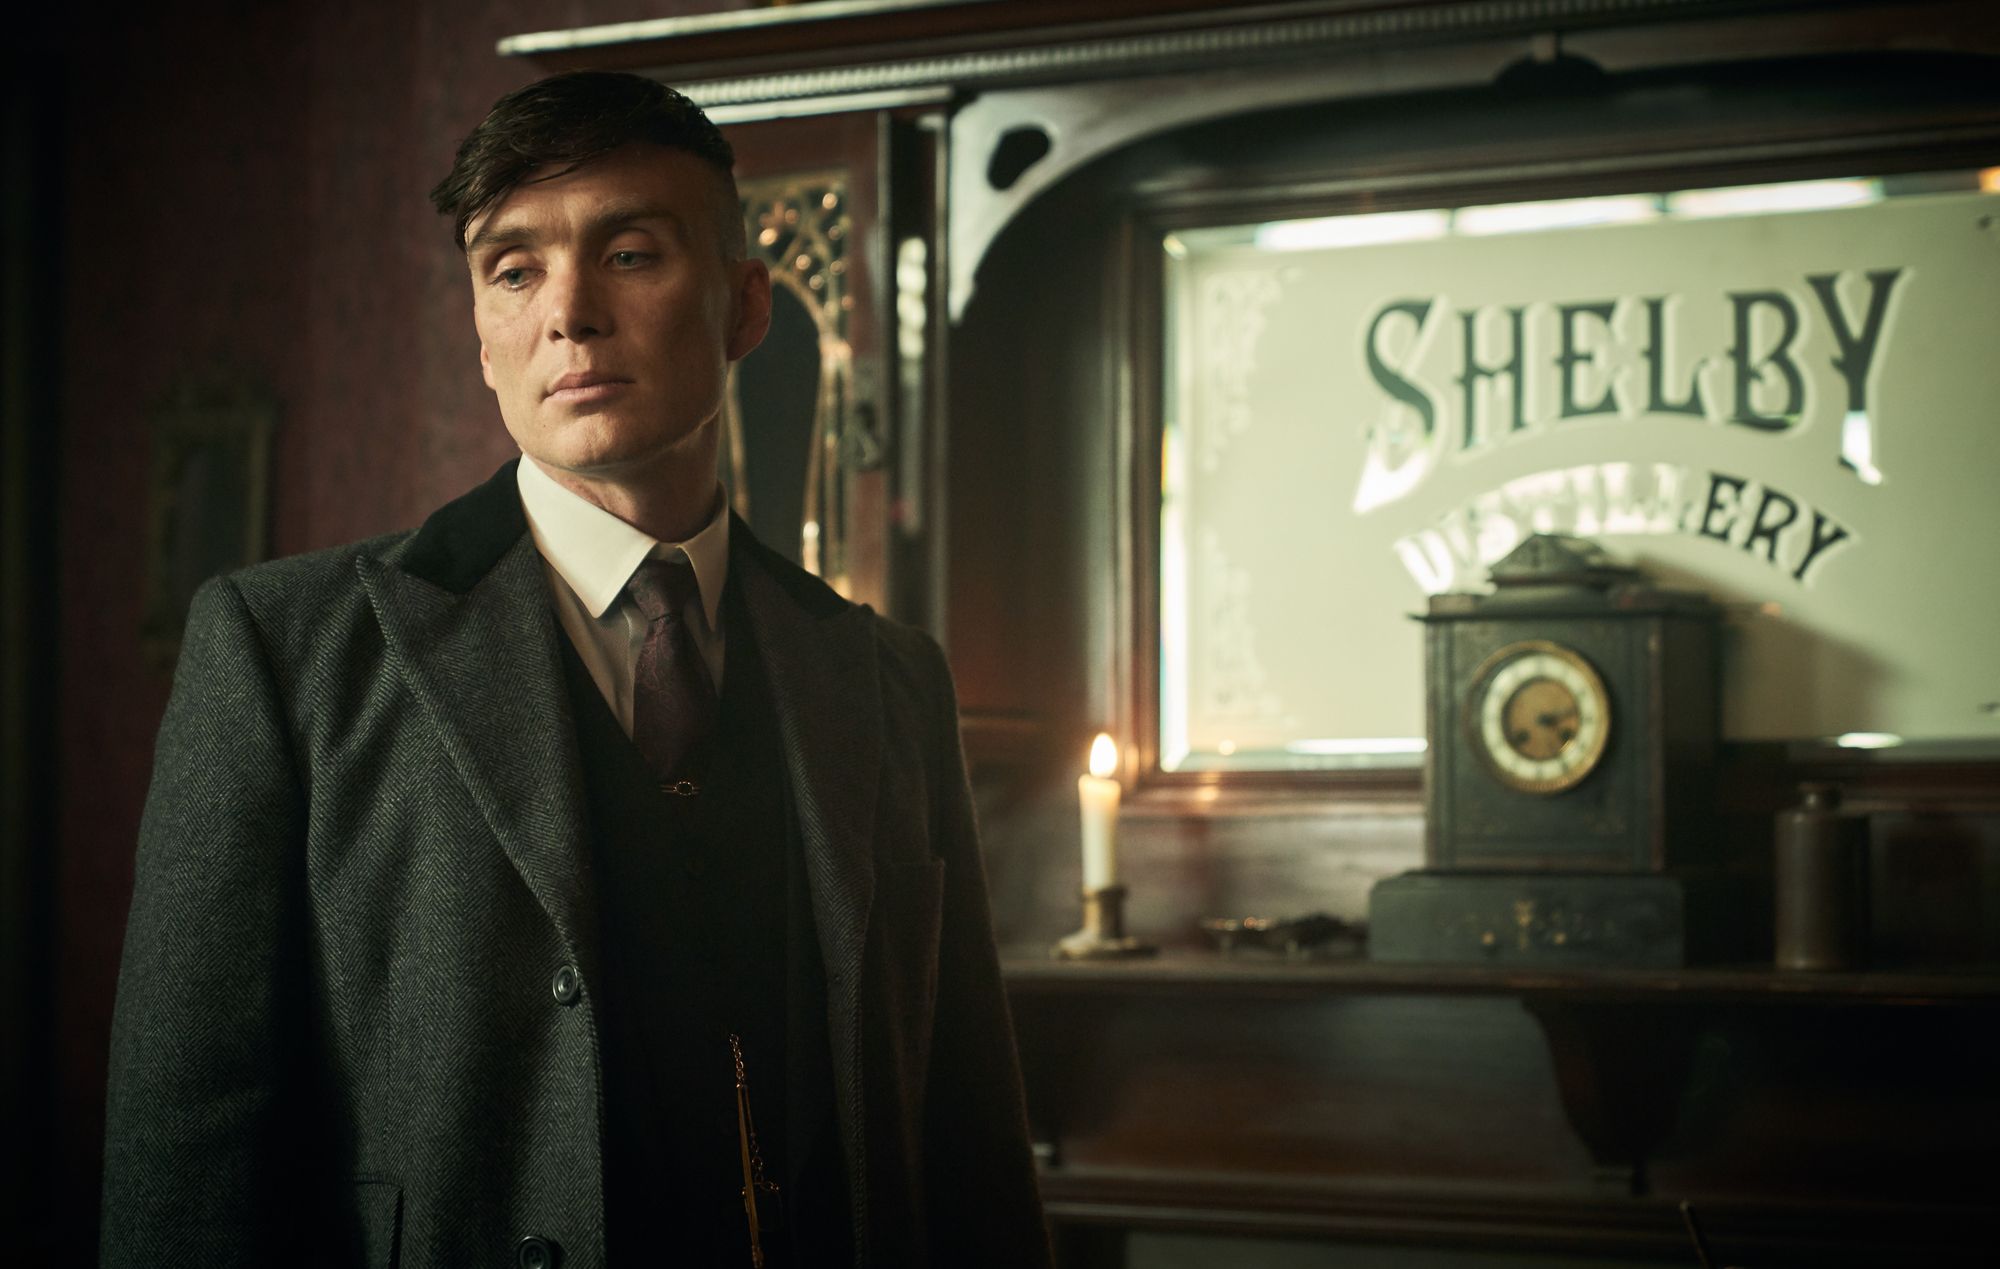 The complete story of the Peaky Blinders, Shelby Brothers